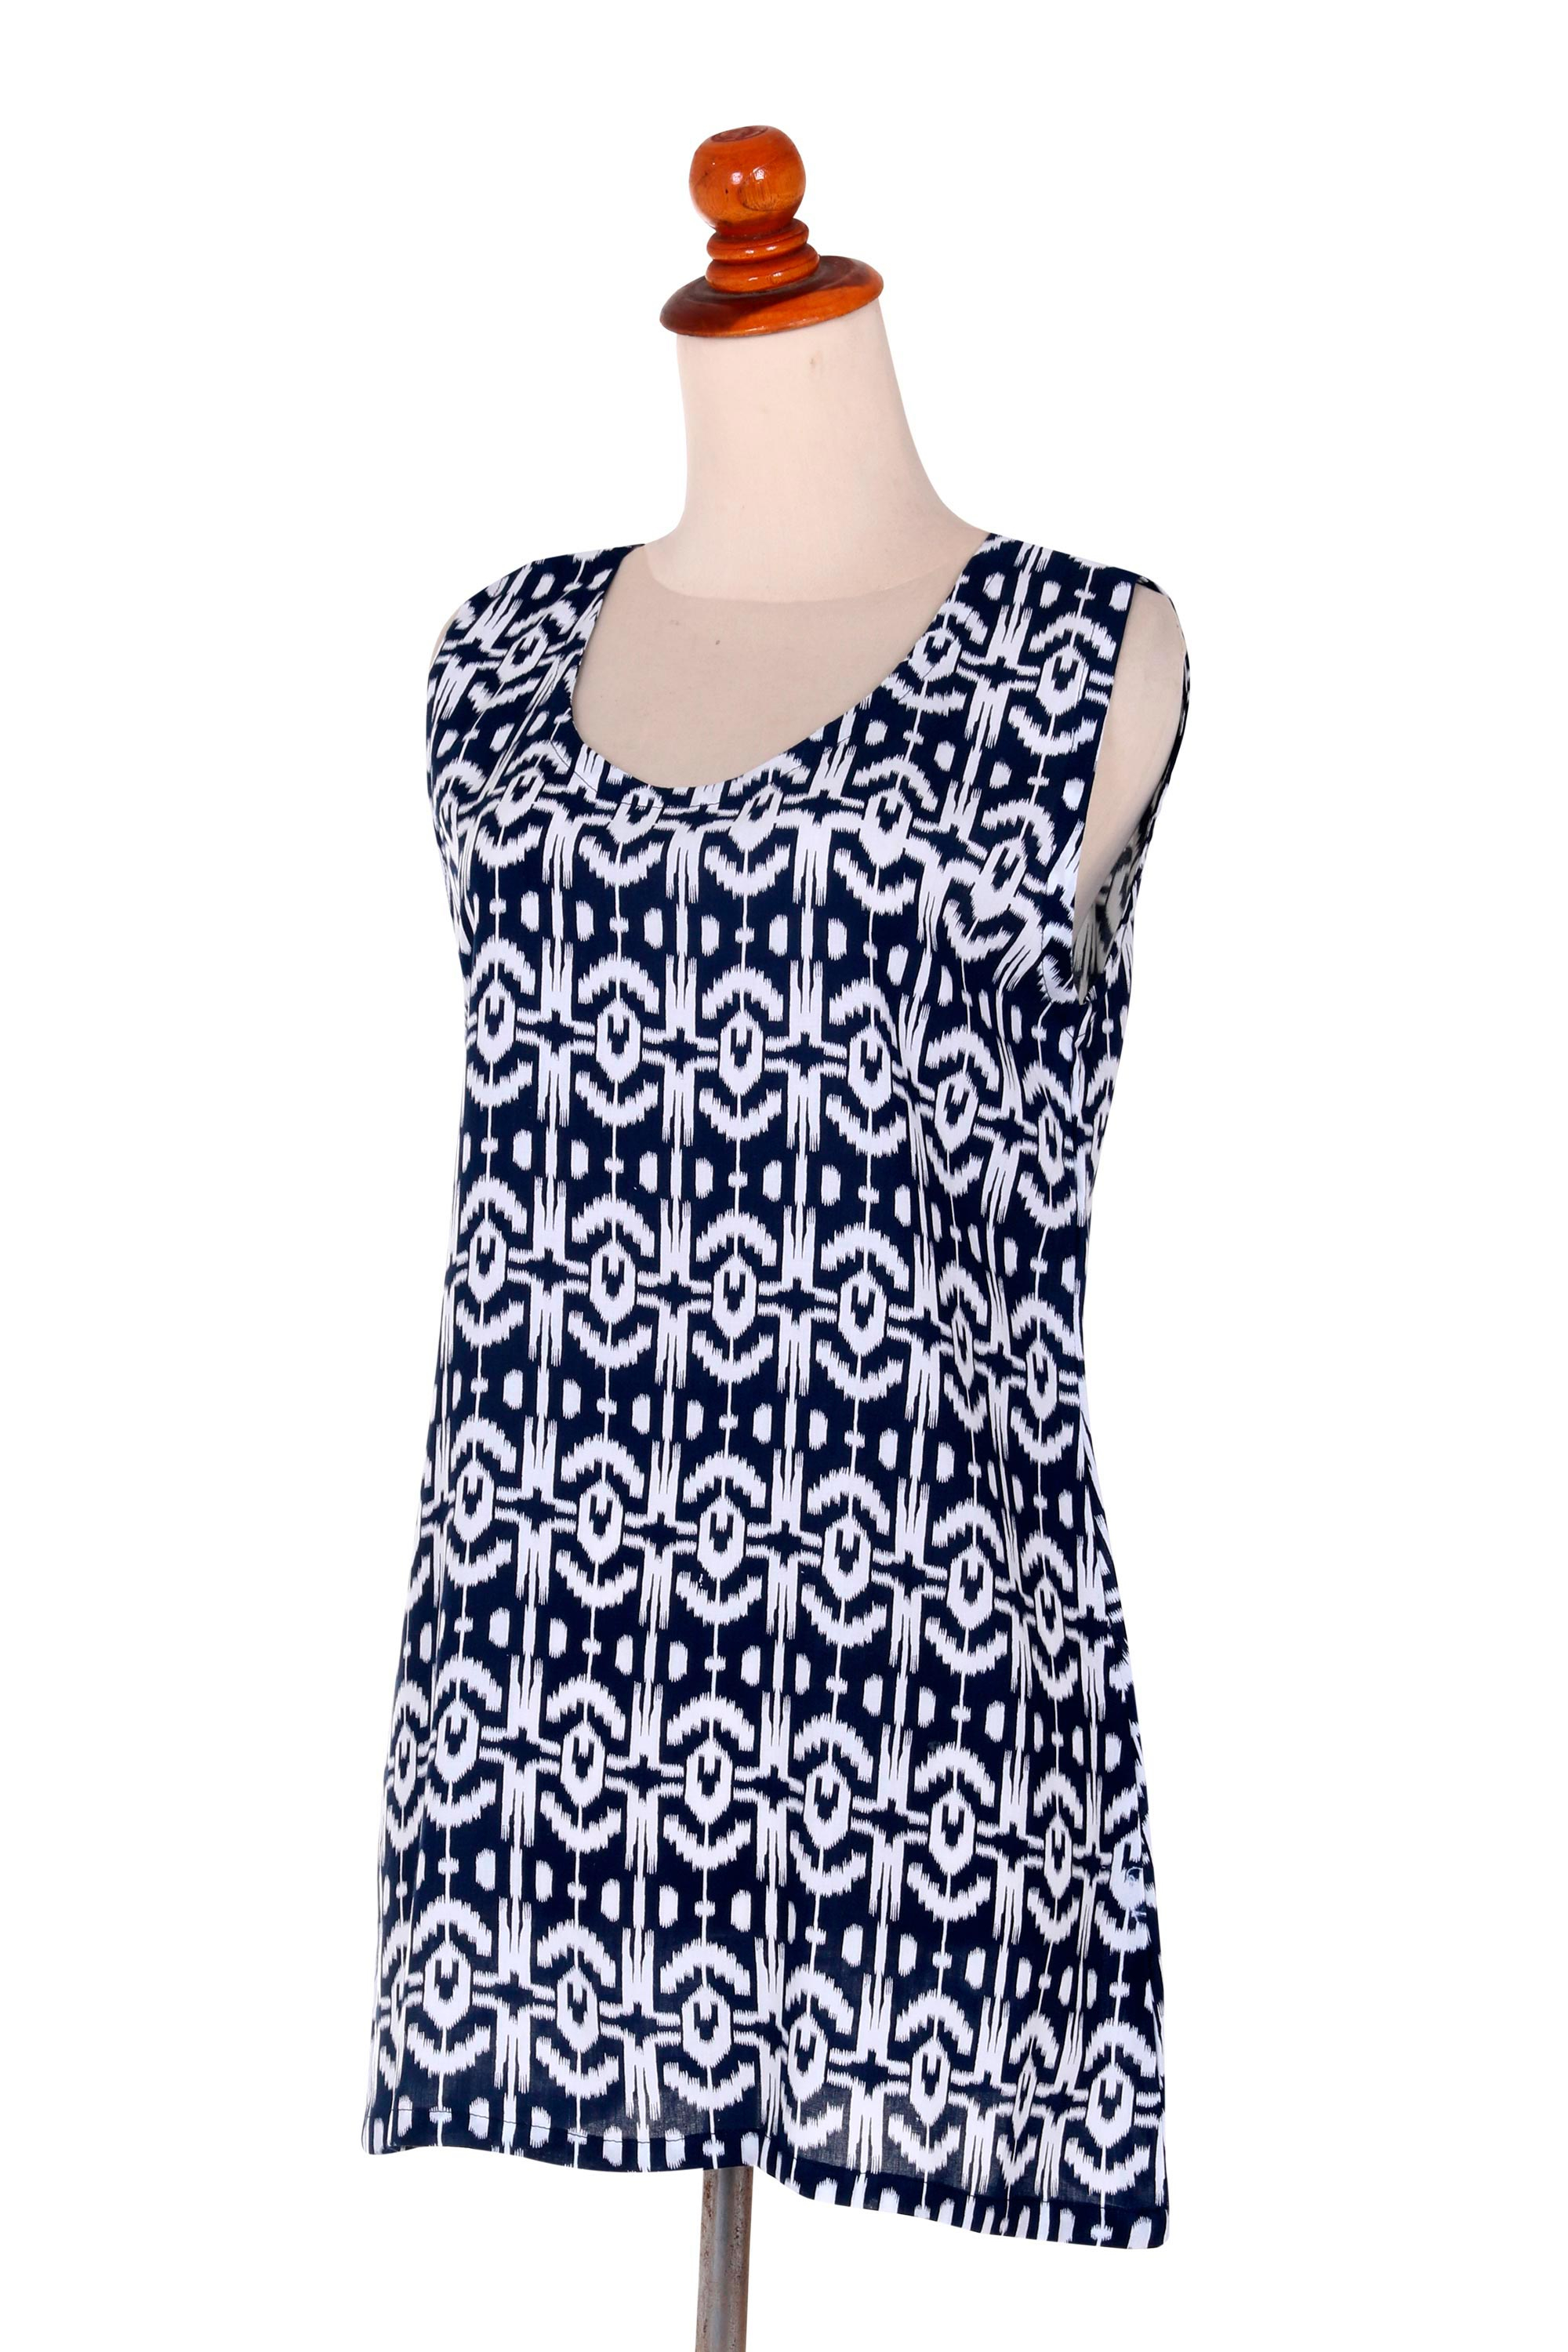 Balinese Hand-stamped Blue and White Tank Top - Candidasa Midnight | NOVICA